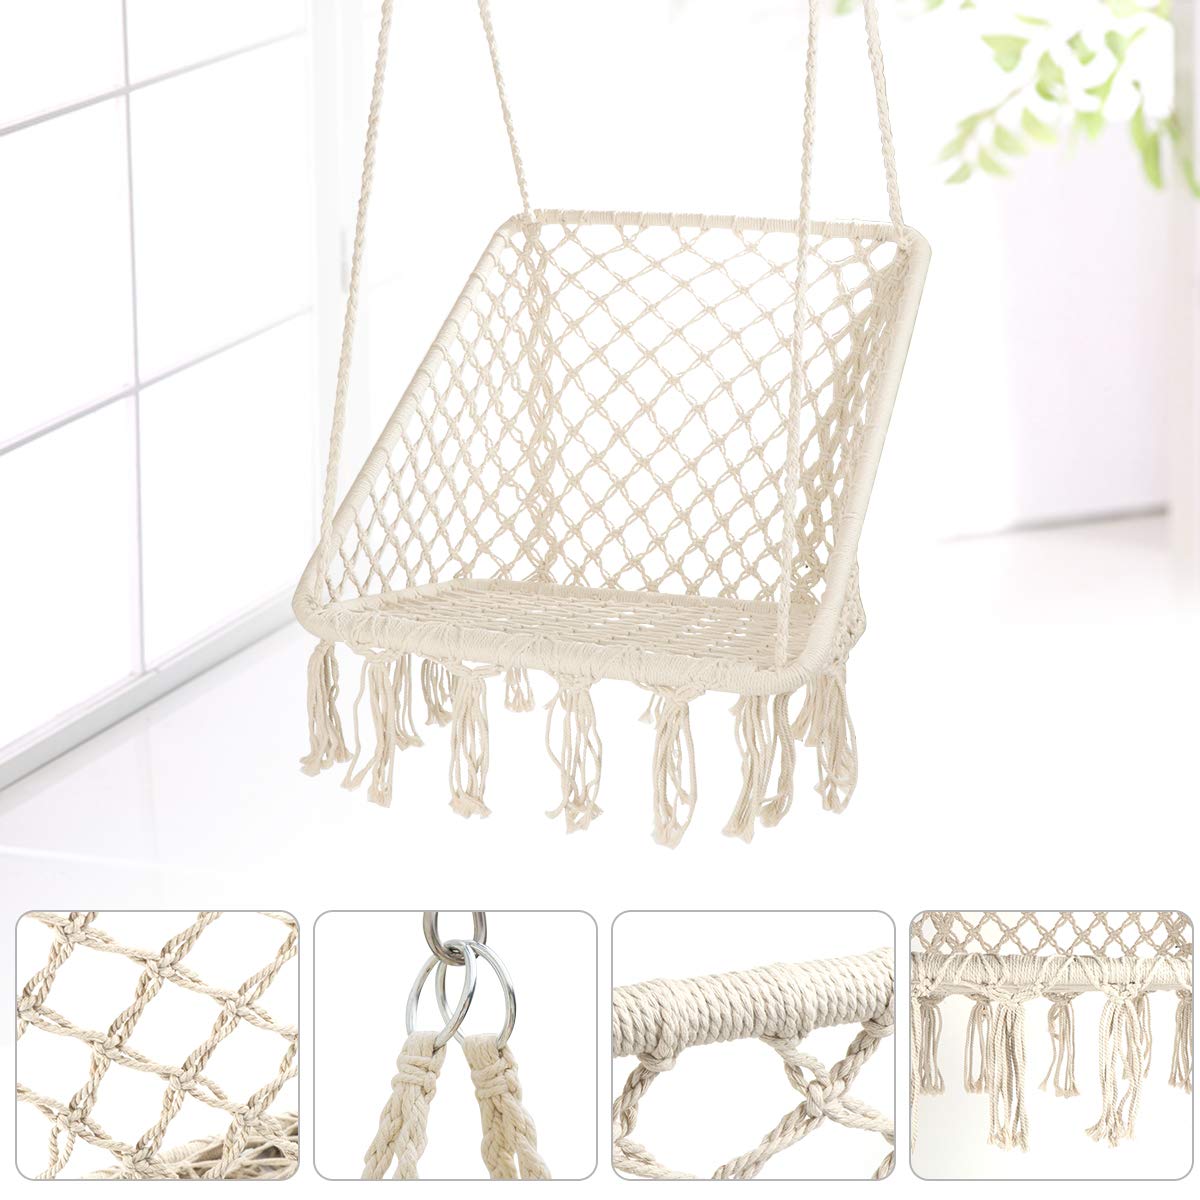 New Square Cotton Rope Swing Hanging Chair